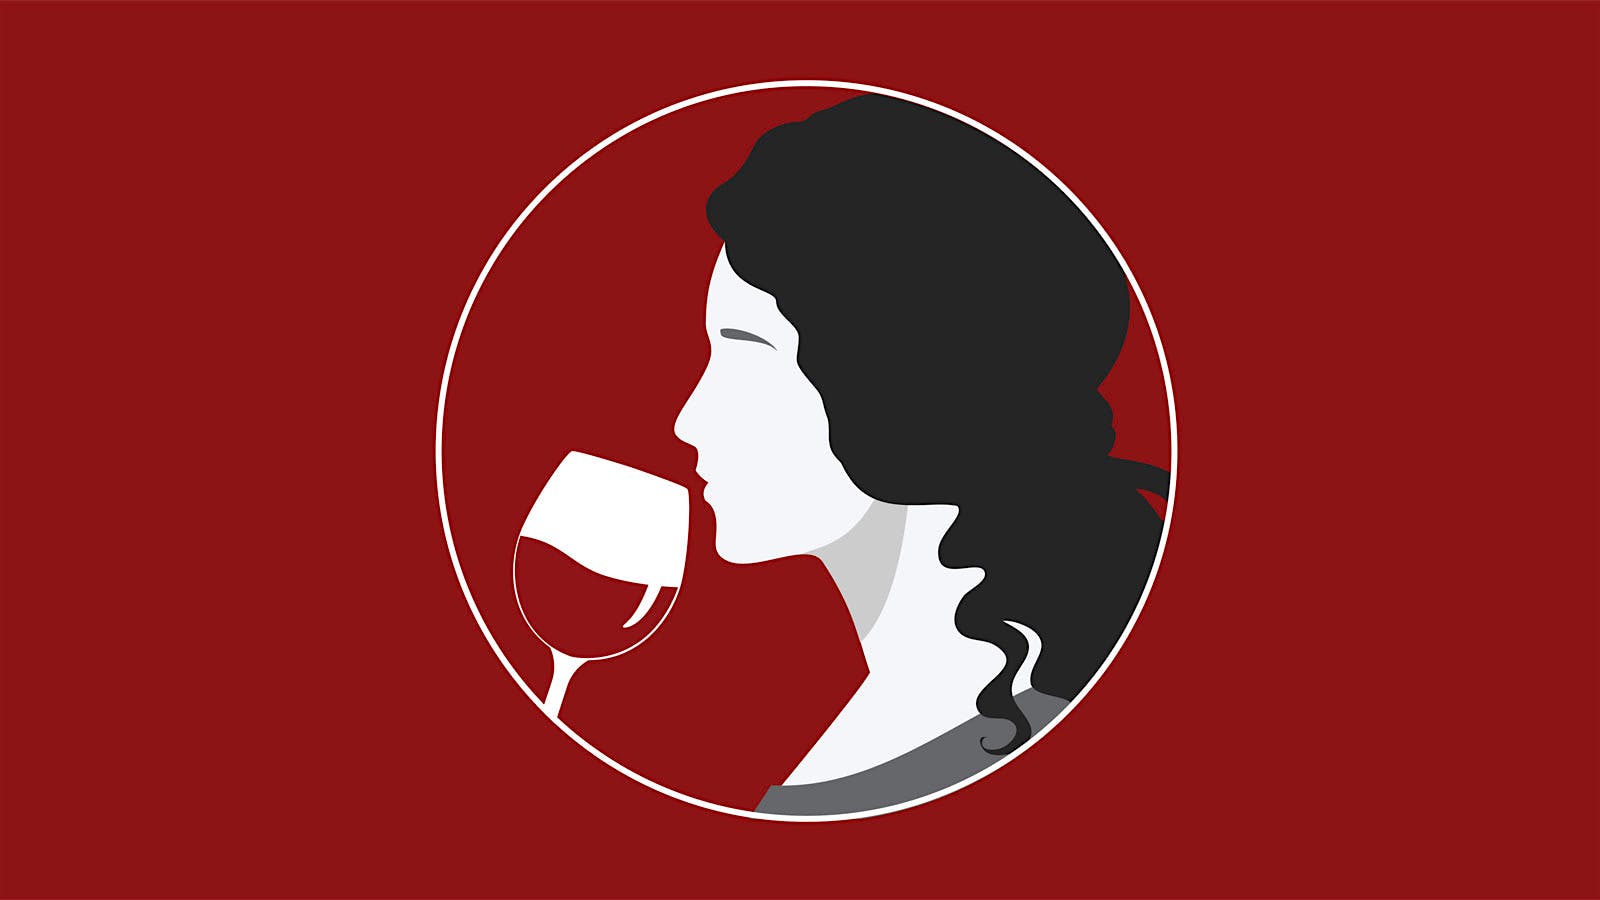 What are the risks of drinking small quantities of alcohol while pregnant?